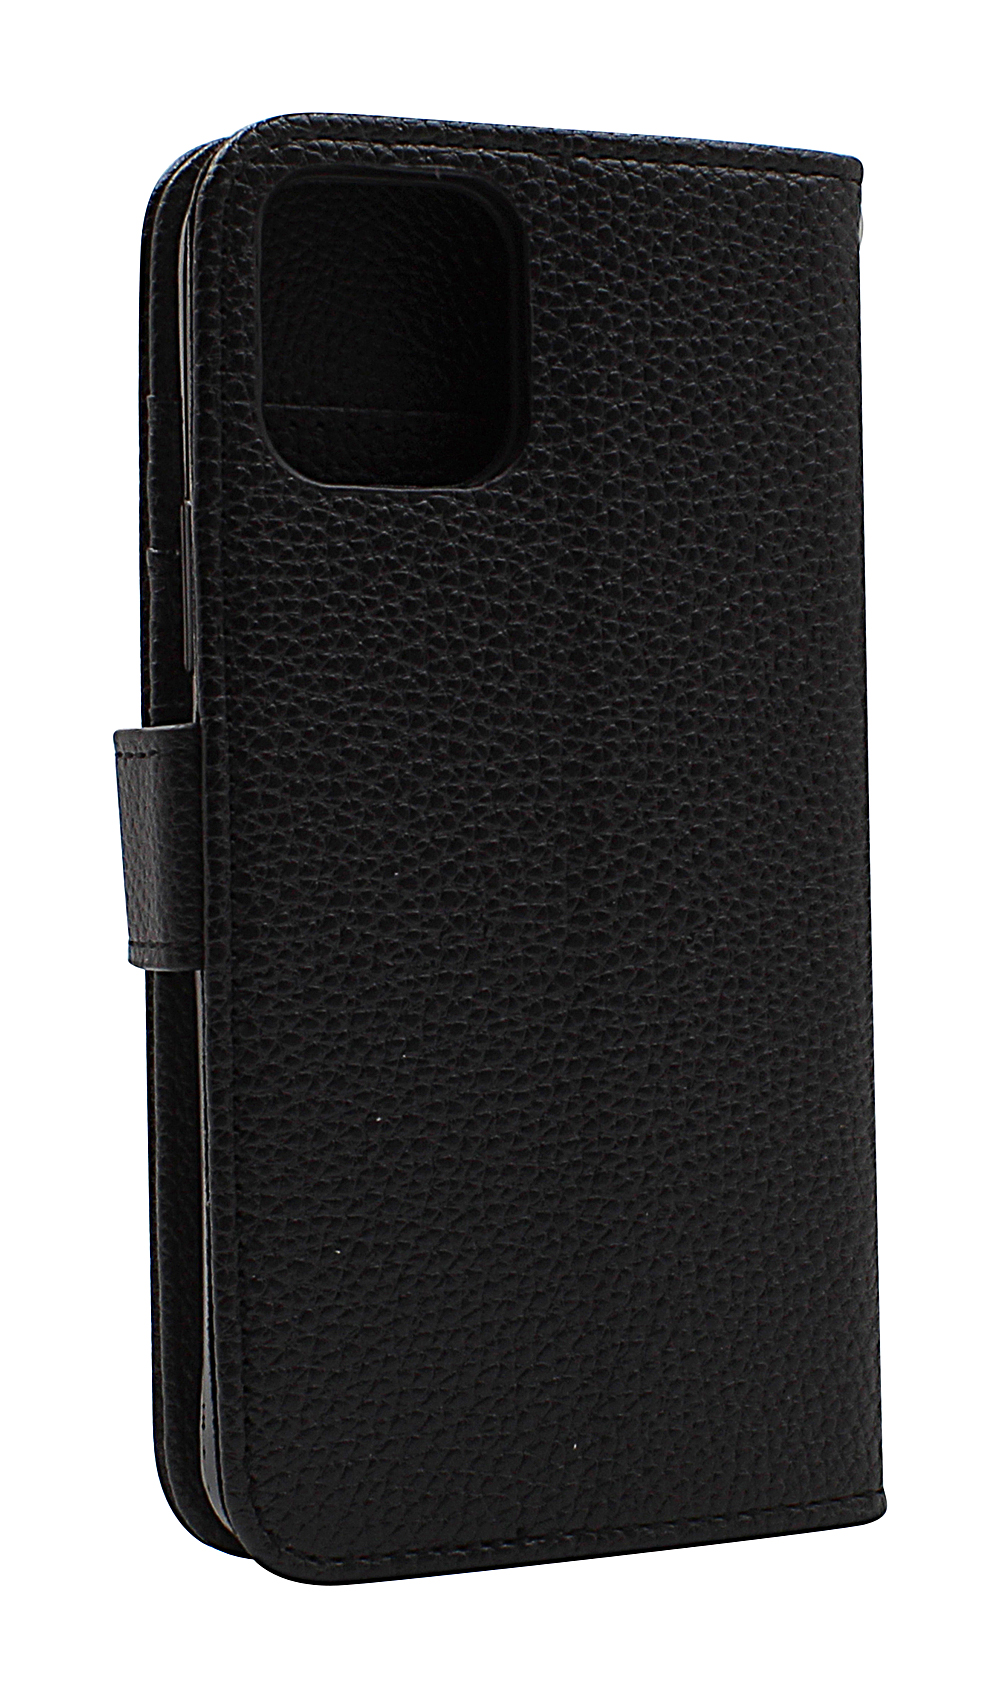 New Standcase Wallet iPhone 12 Pro (6.1)